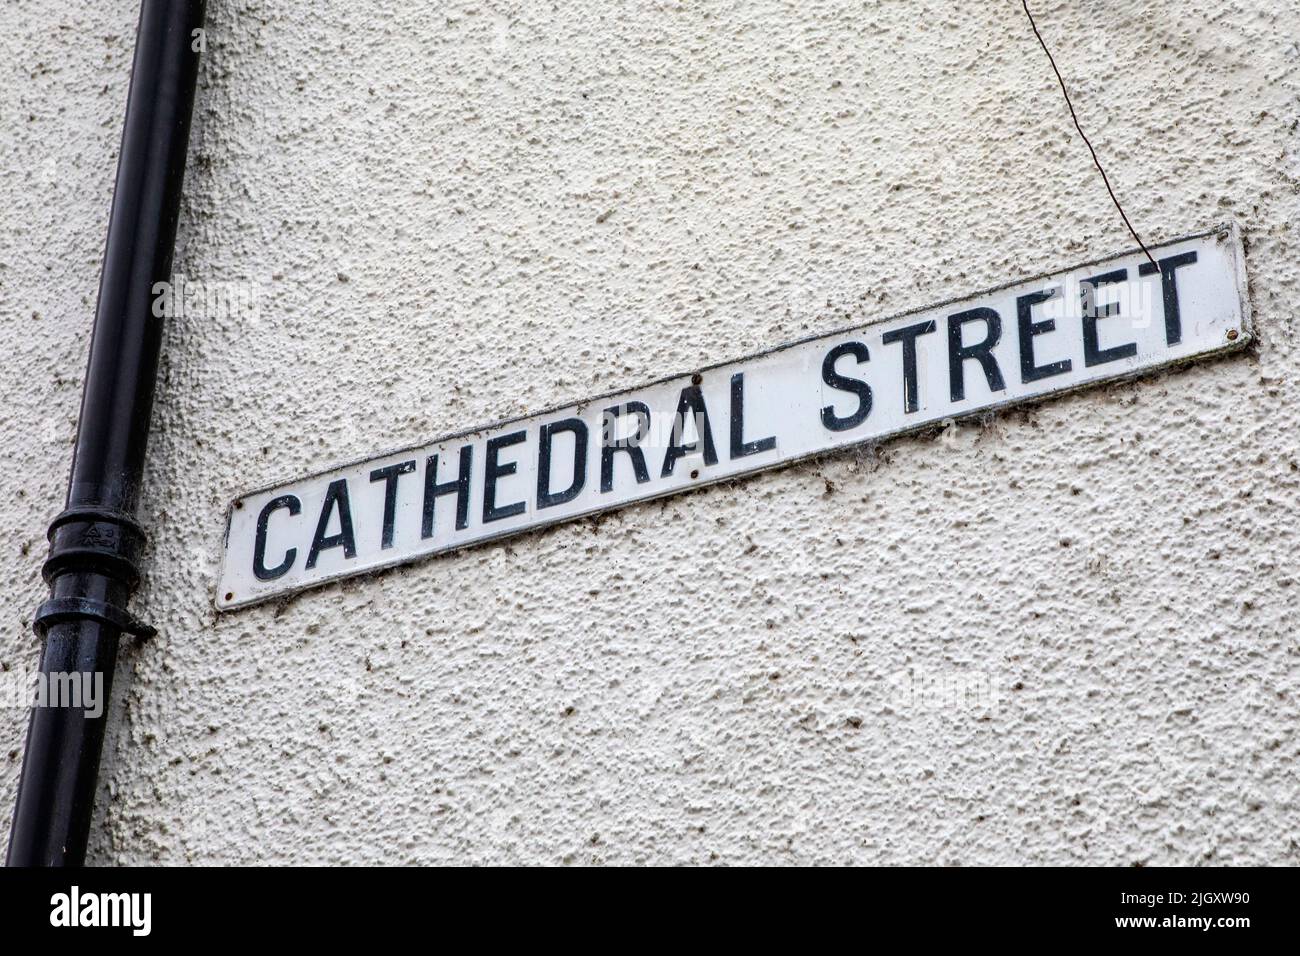 Dunkeld, Scotland - October 11th 2021: A street sign for Cathedral Street in the beautiful town of Dunkeld in Scotland, UK. Stock Photo